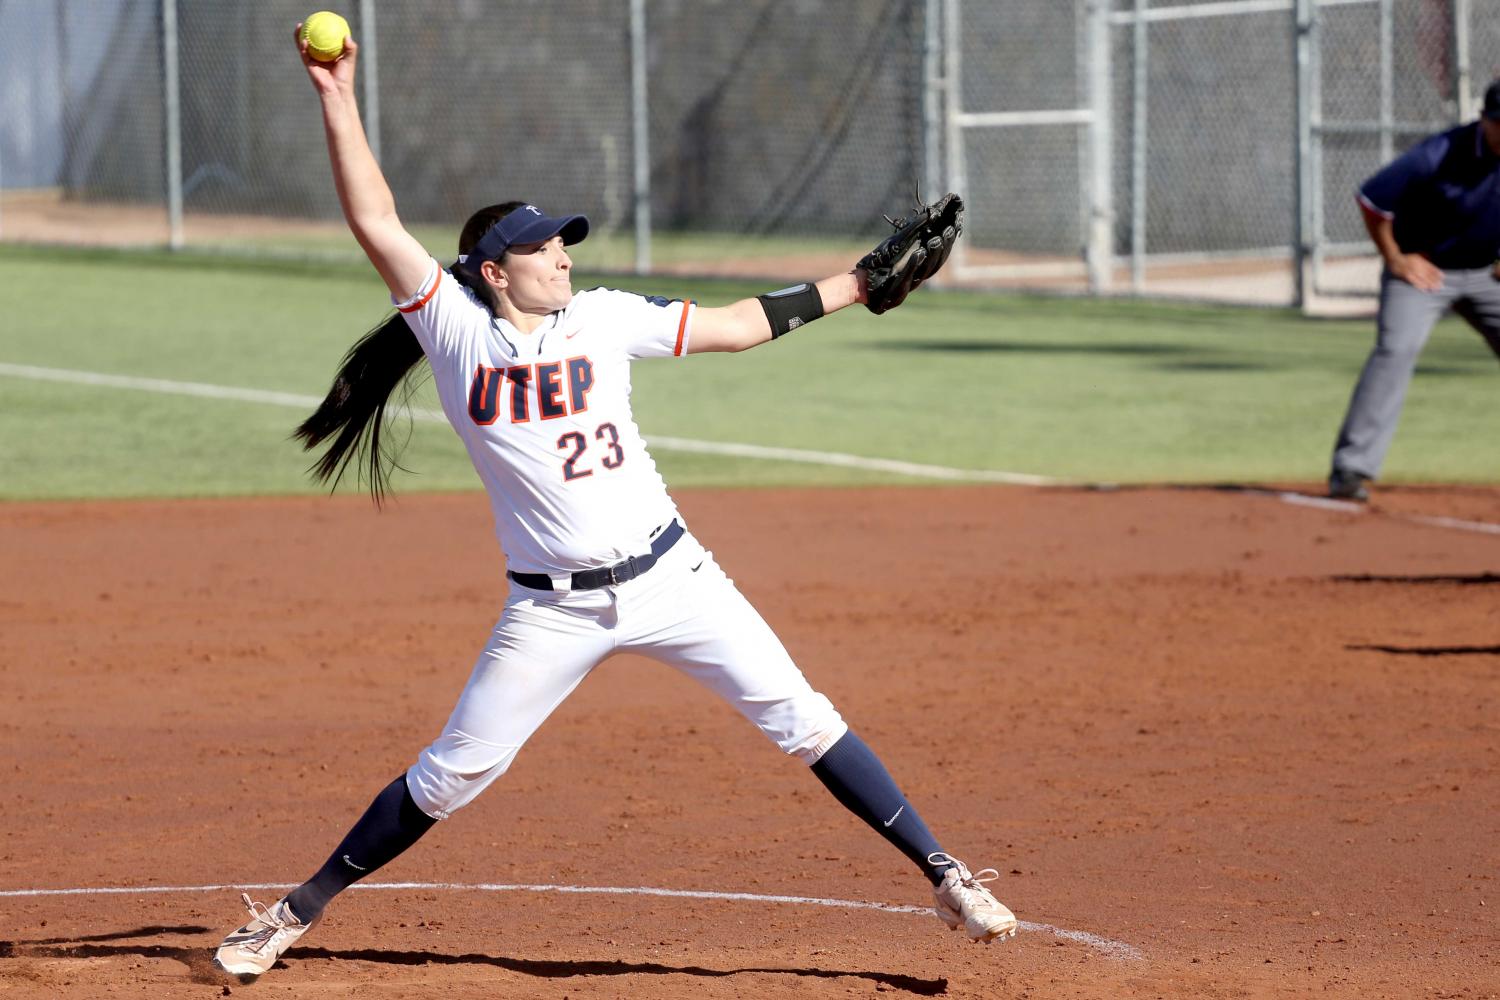 Erika Harrawood saved her best season for last and has struck out 46 batters so far.